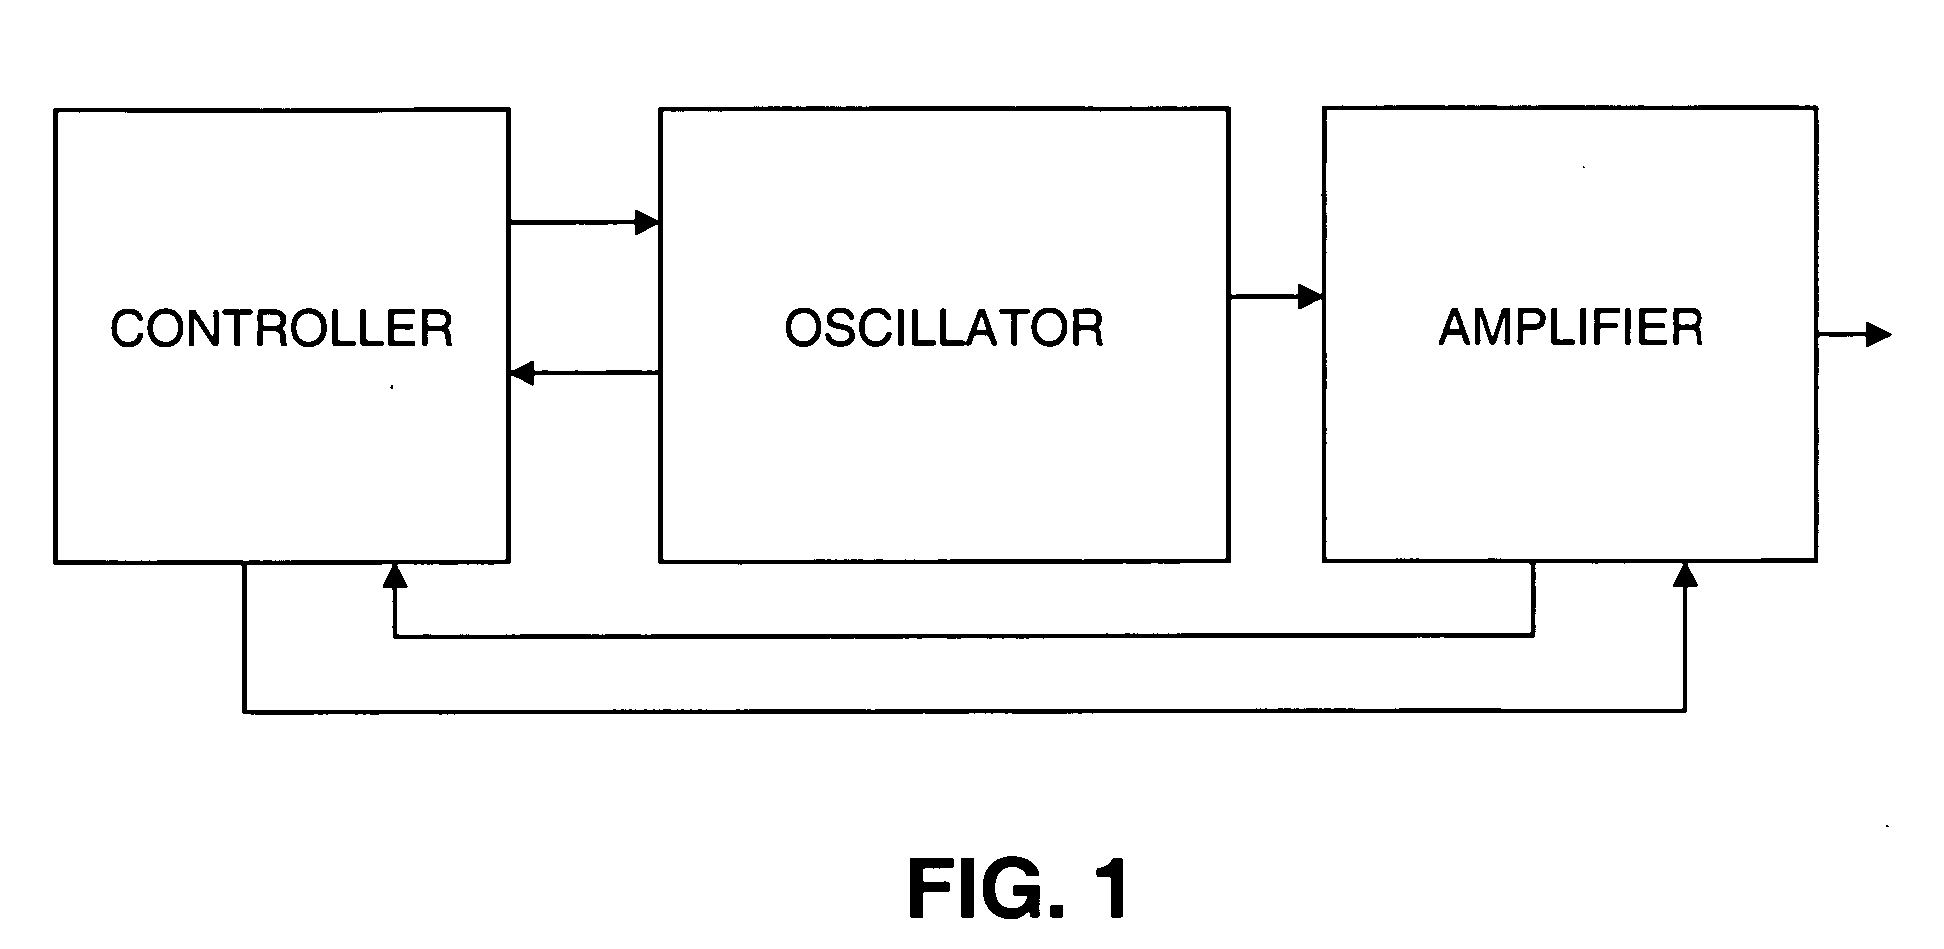 Method and apparatus for controlling and protecting pulsed high power fiber amplifier systems